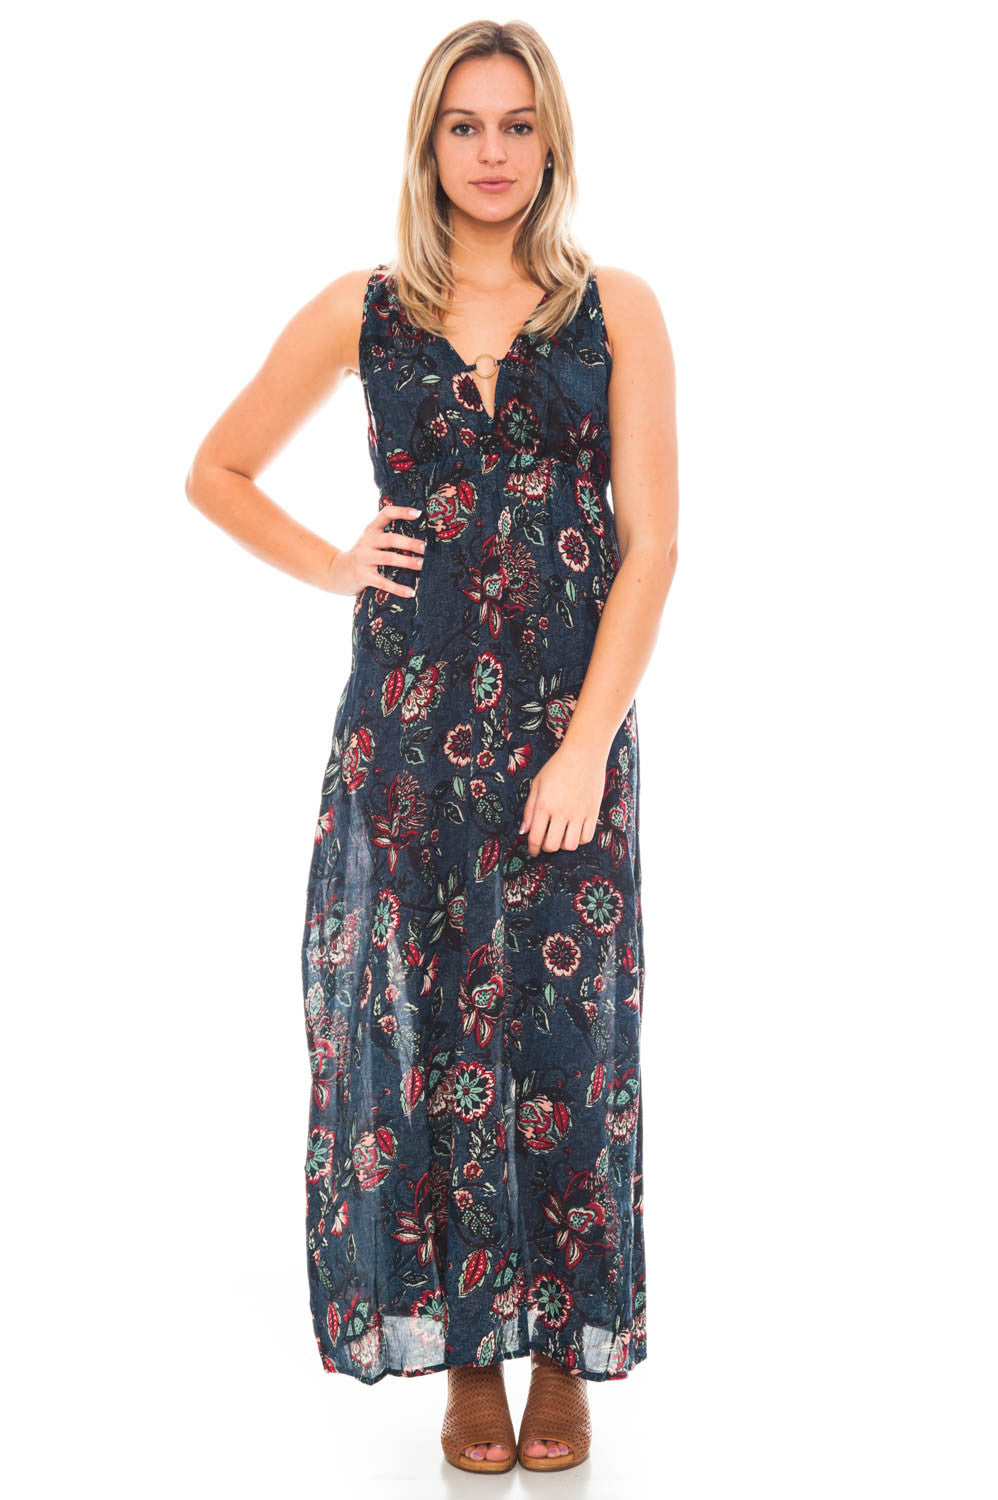 Dress - Patterned Maxi with Criss Cross Back